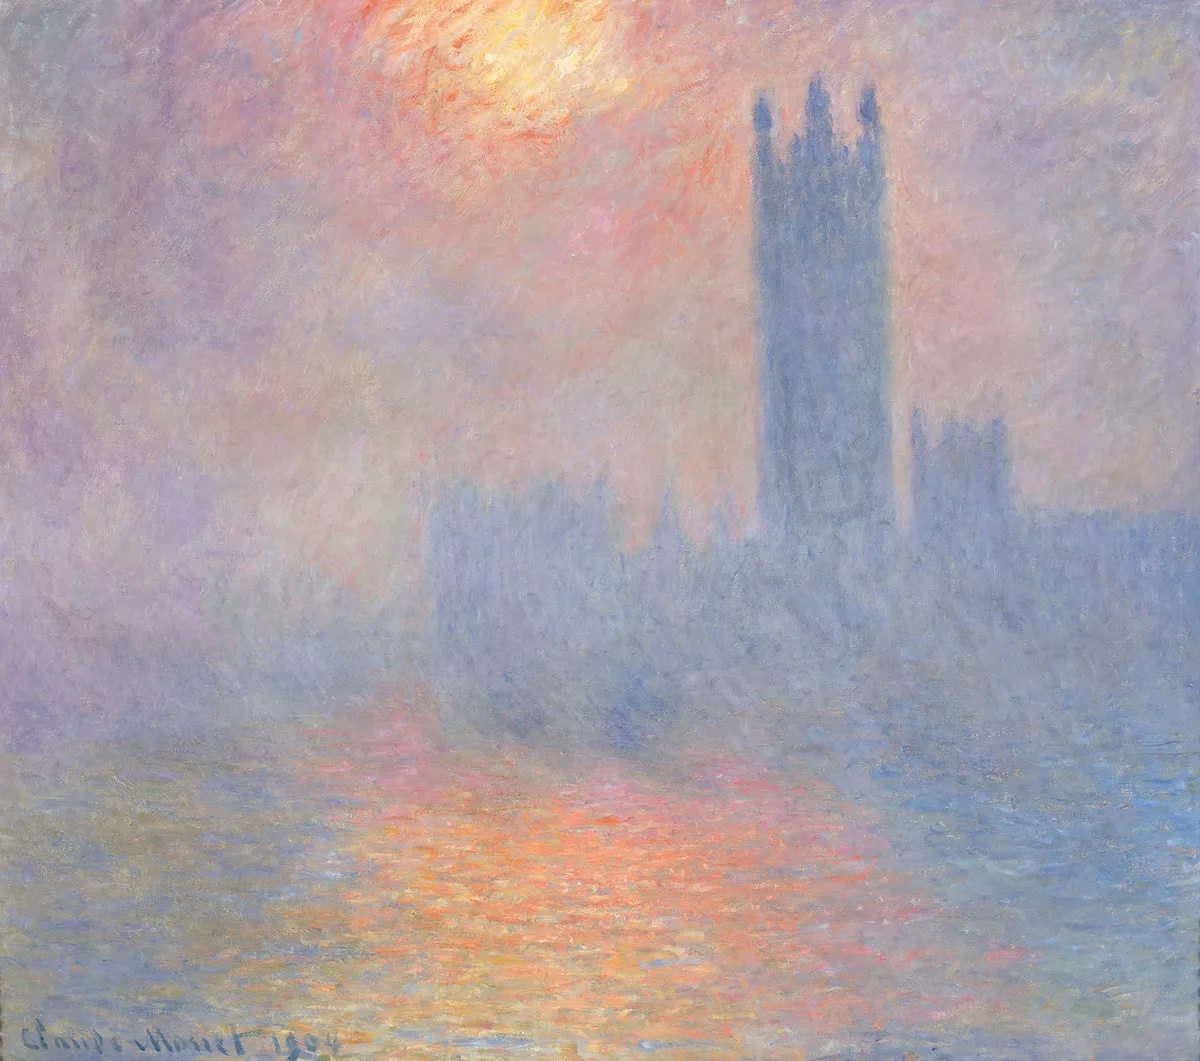 Courtauld to Exhibit Claude Monet`s Paintings of London for the First Time in 120 Years